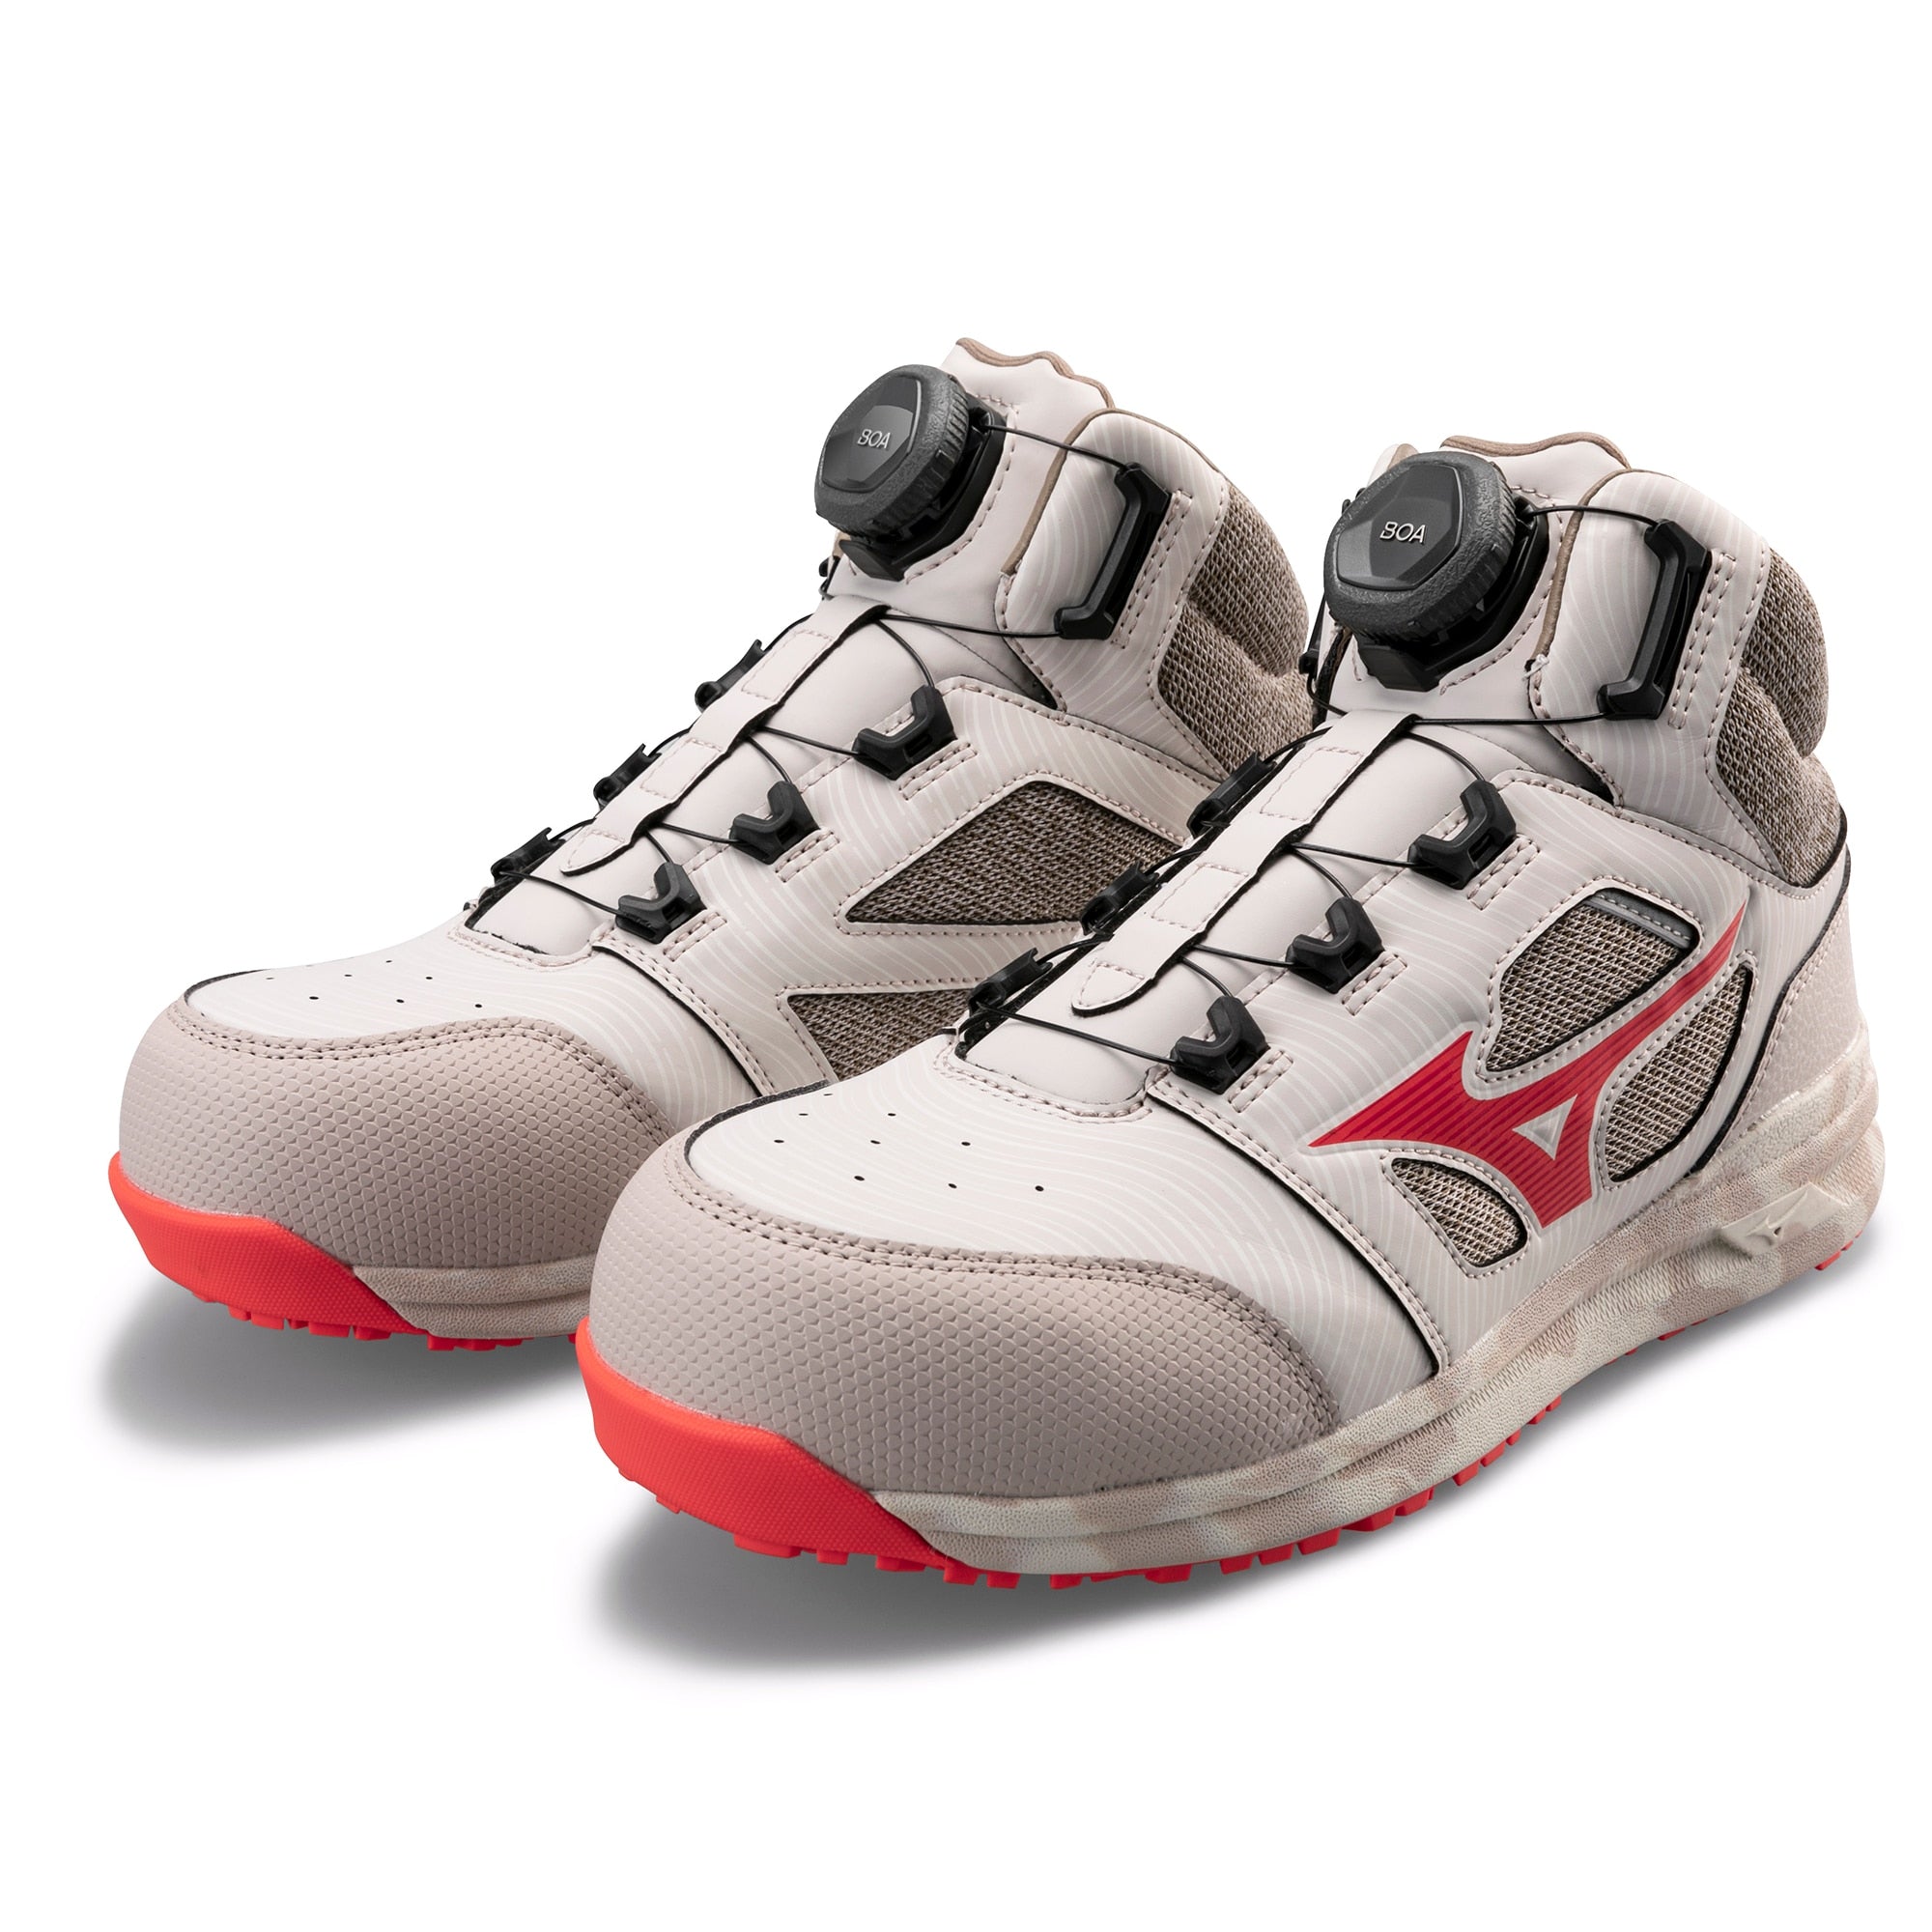 Mizuno Safety Shoes Almighty LSII 73M BOA Limited Color Sand Beige x Orange